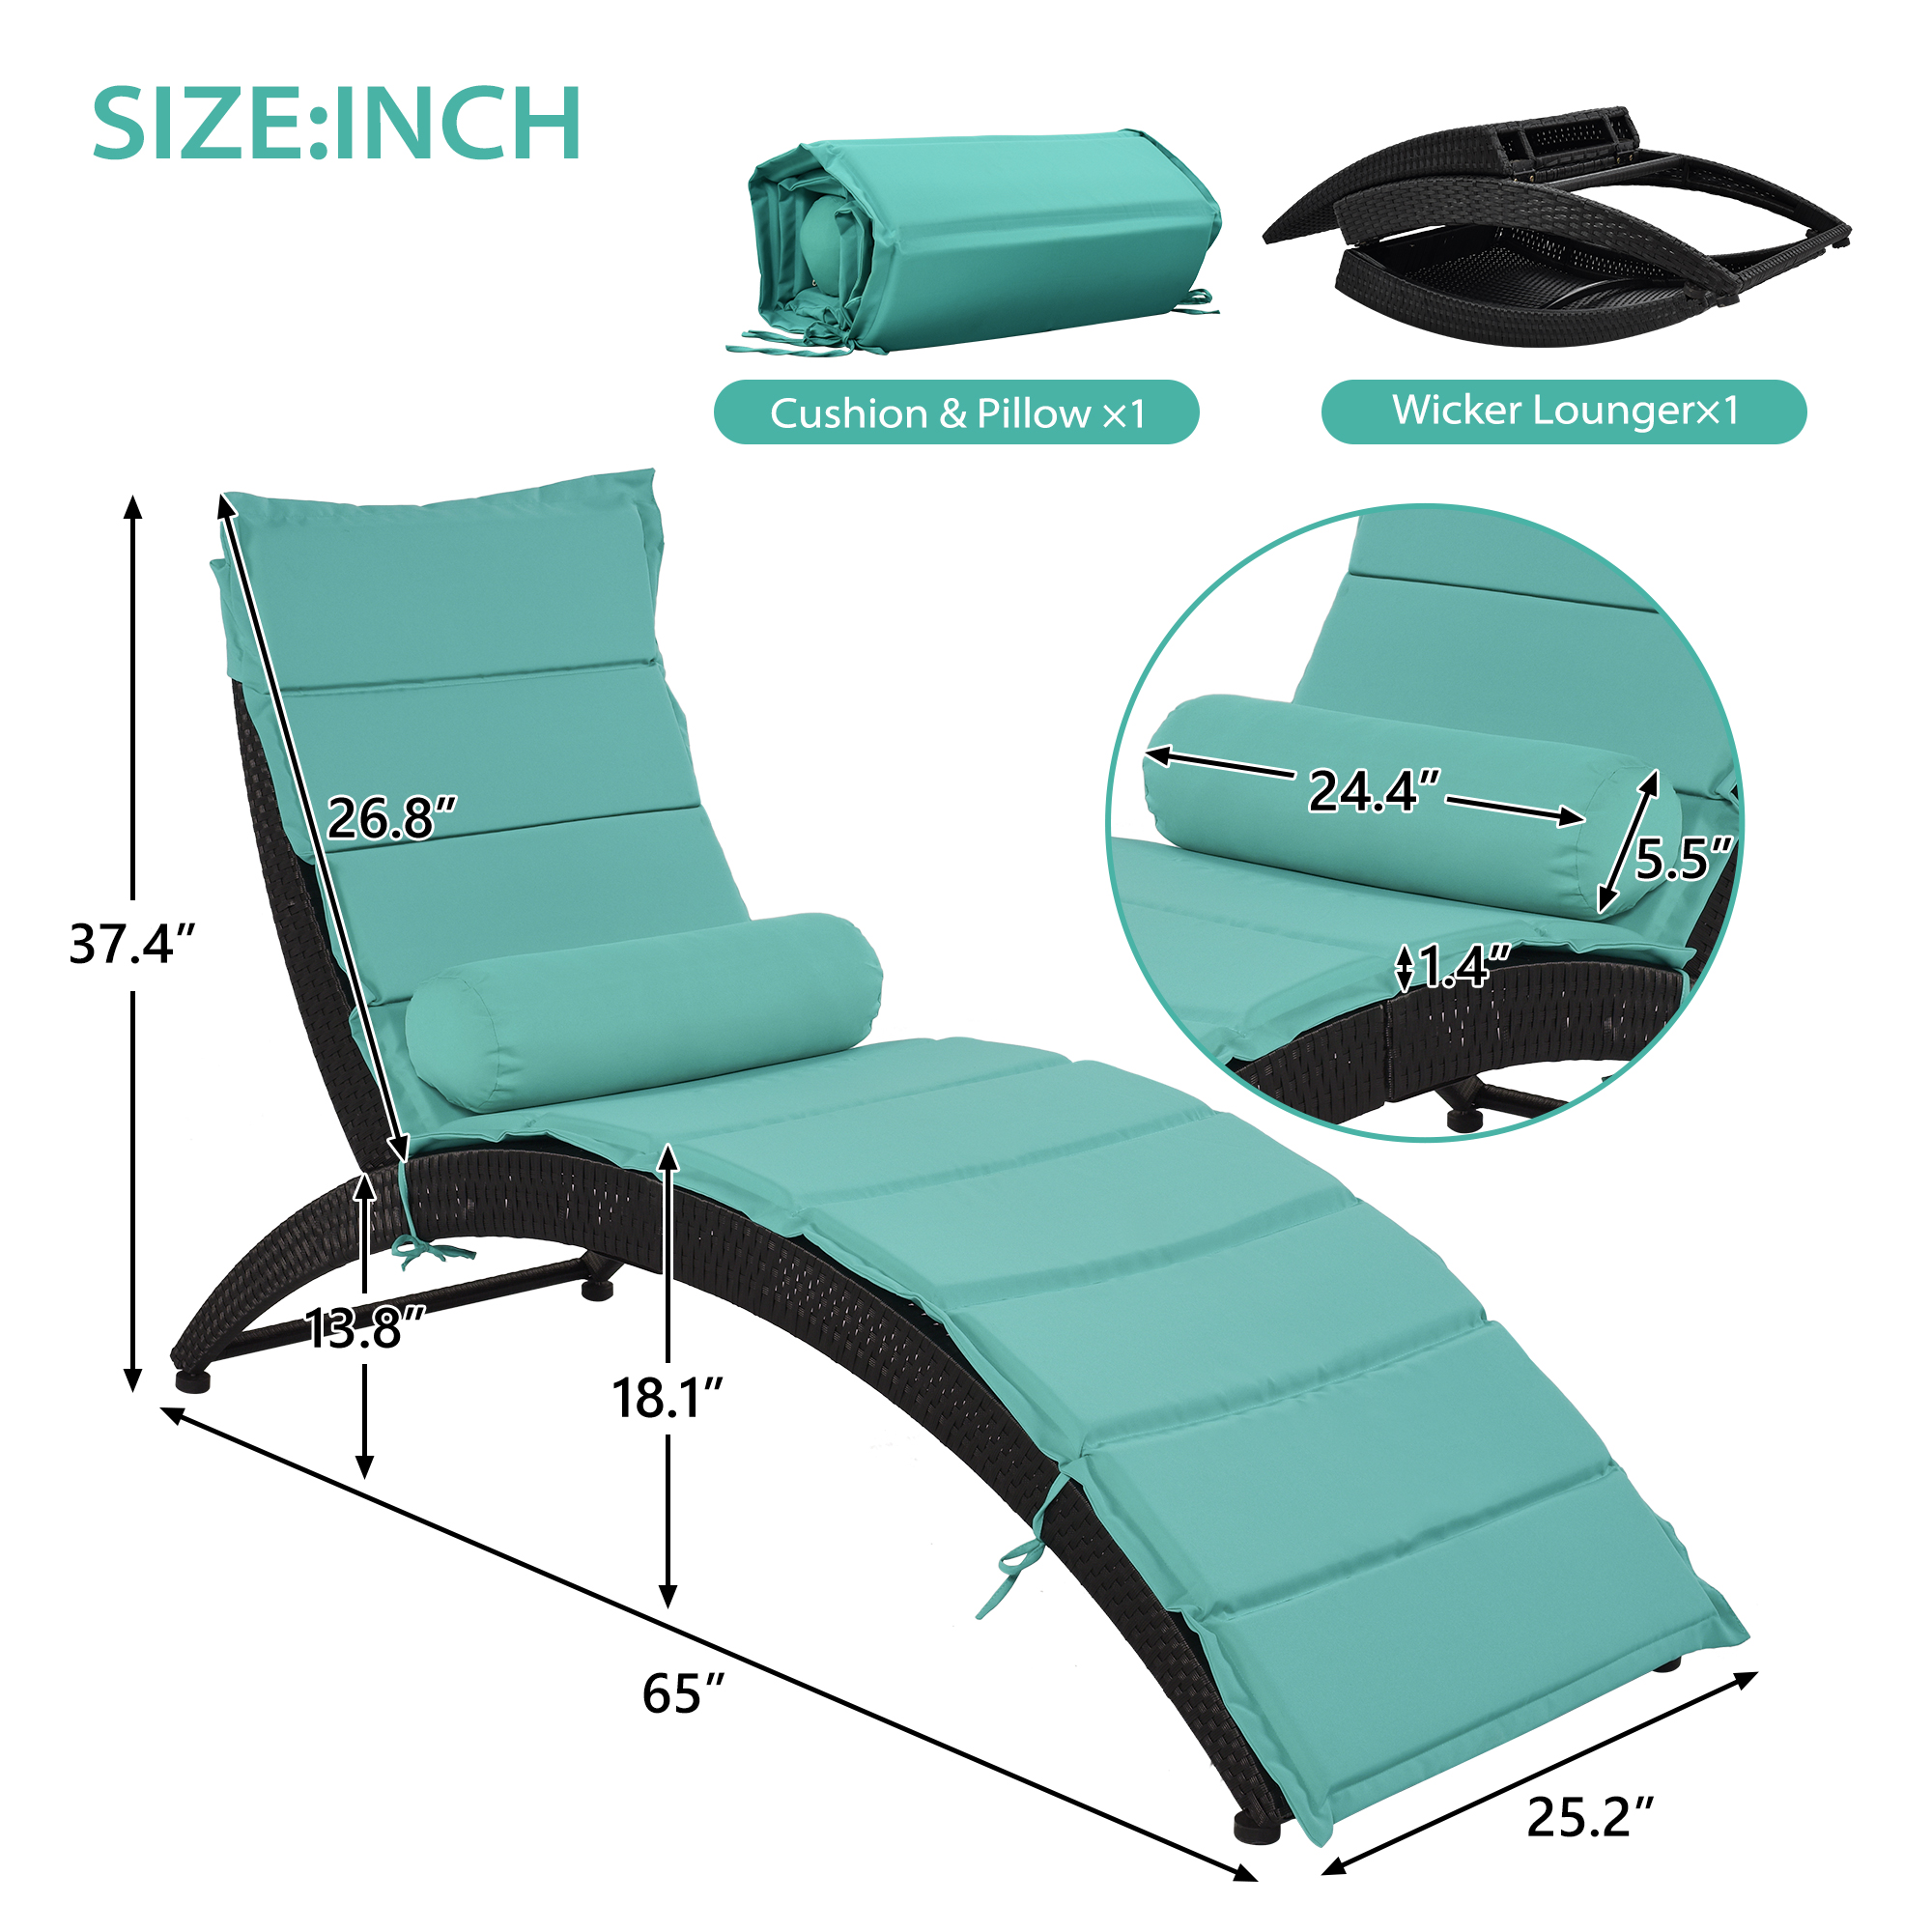 Patio Chaise Lounge, Reclining Camping Chair, PE Rattan Folding Sun Recliner Chair with Seat Cushion, Poolside Garden Outdoor Chaise Lounge Chairs, JA1096 - image 3 of 8